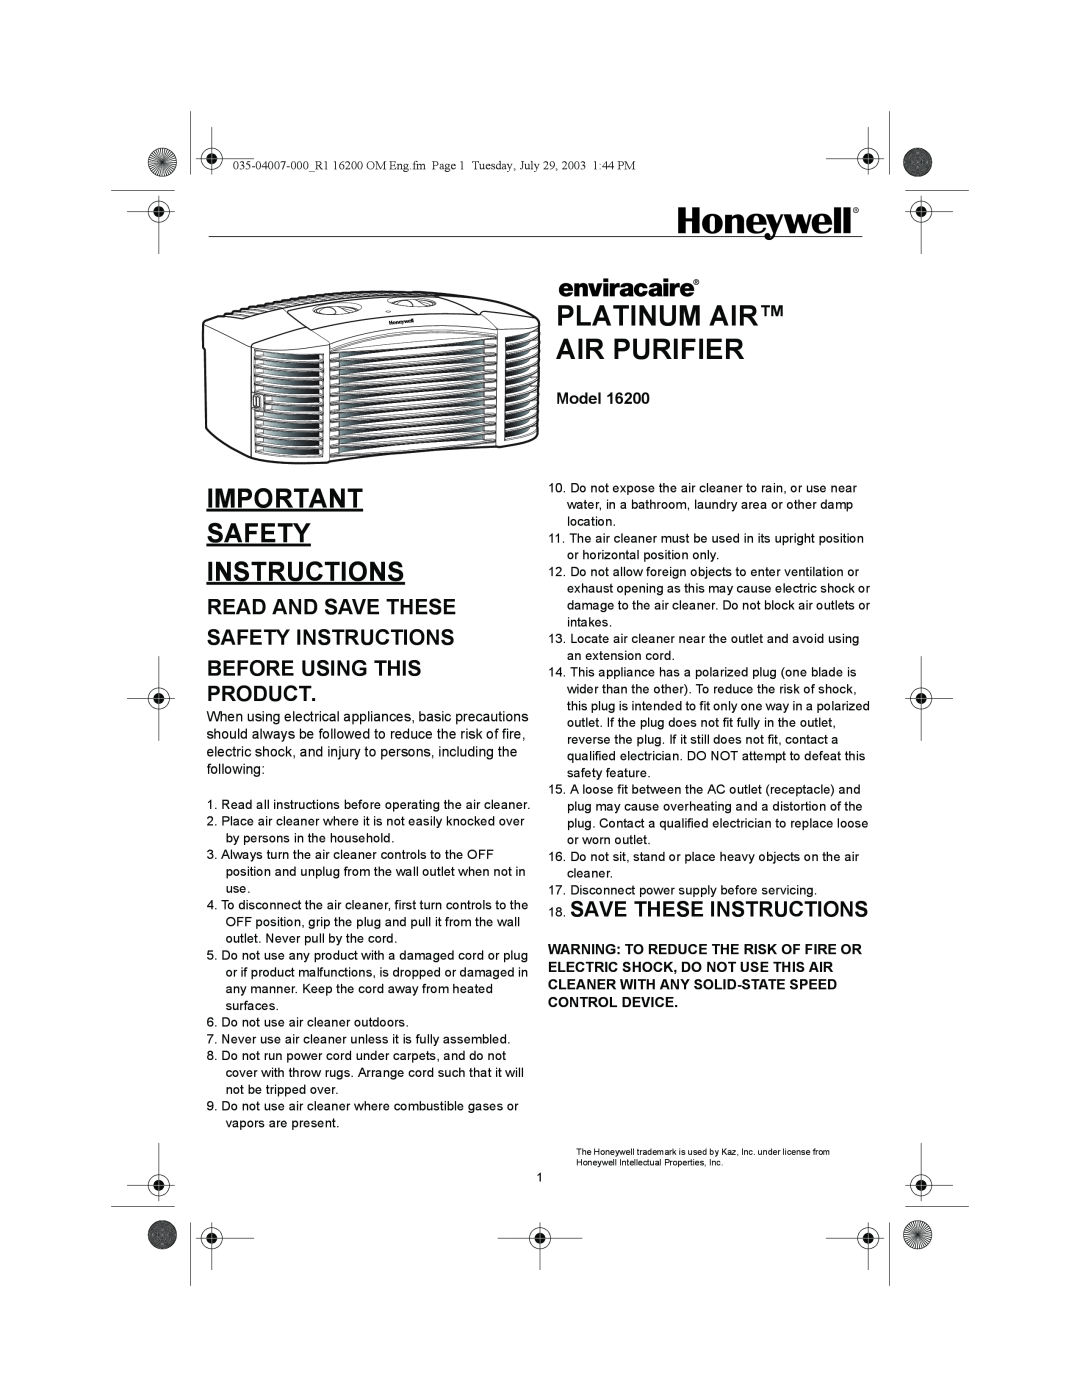 Honeywell 16200 important safety instructions Platinum Air Air Purifier, Safety Instructions, Before Using This Product 